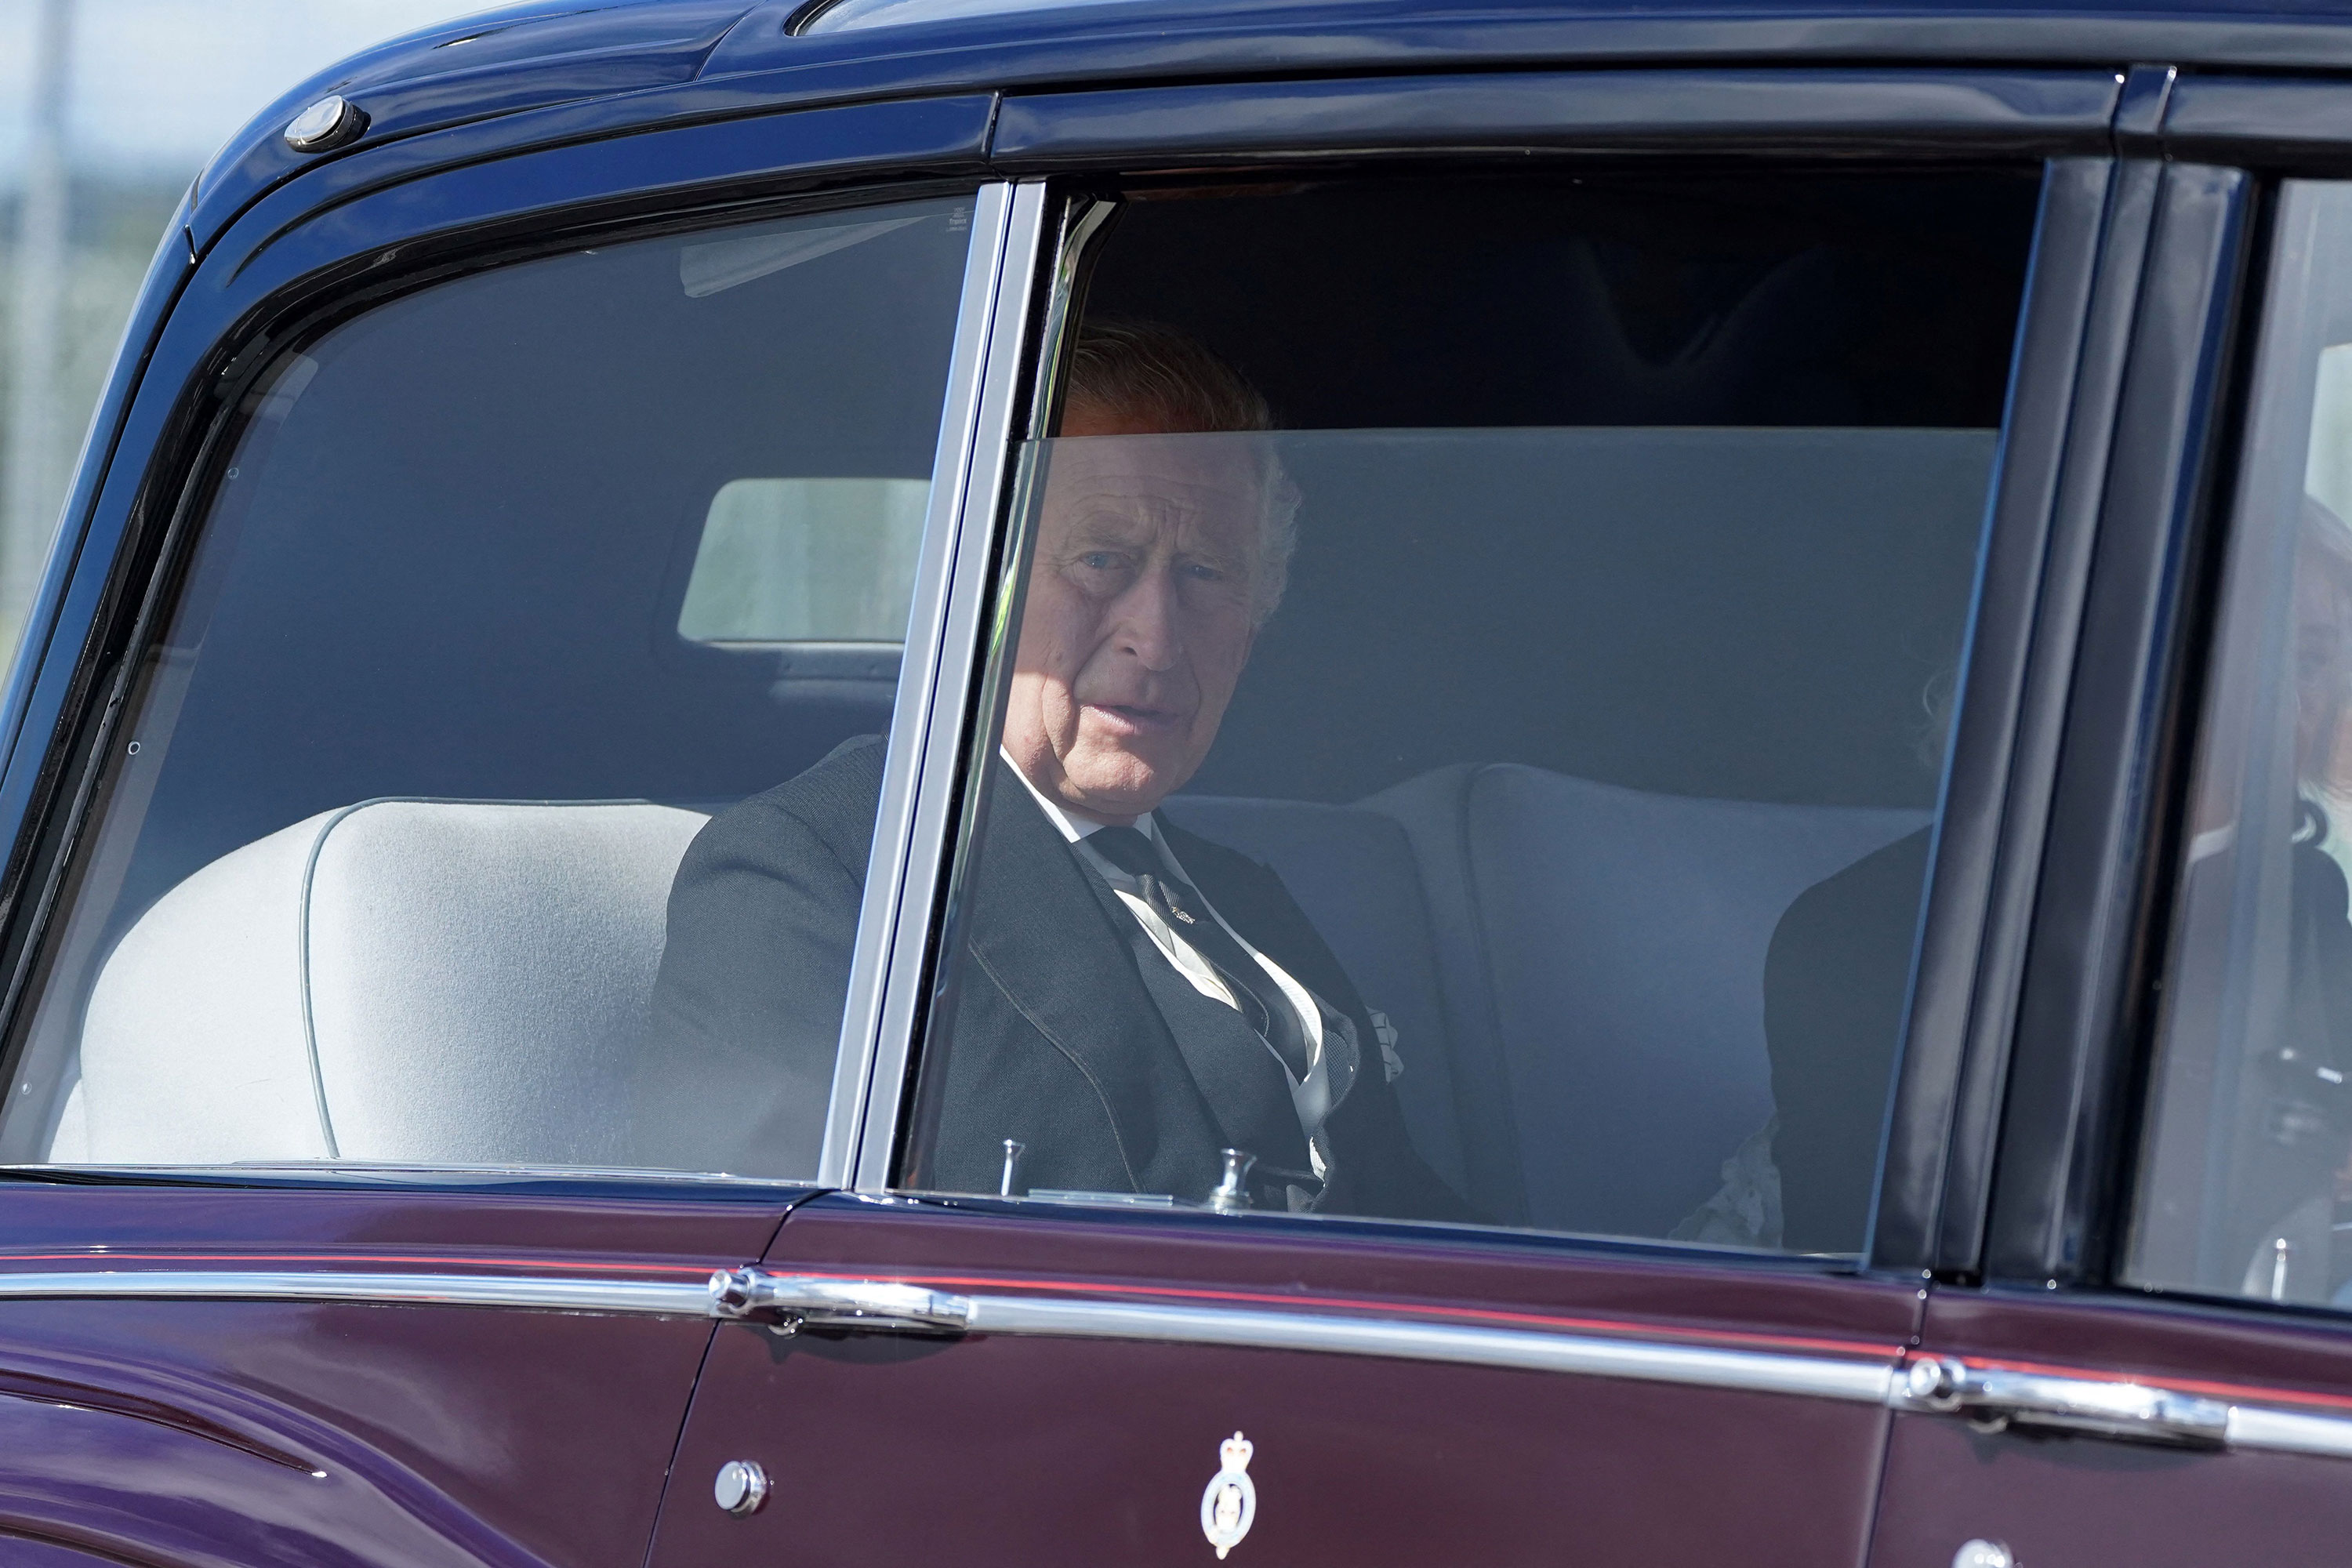 King Charles III and Camilla, Queen Consort are driven away from Edinburgh airport on Monday.